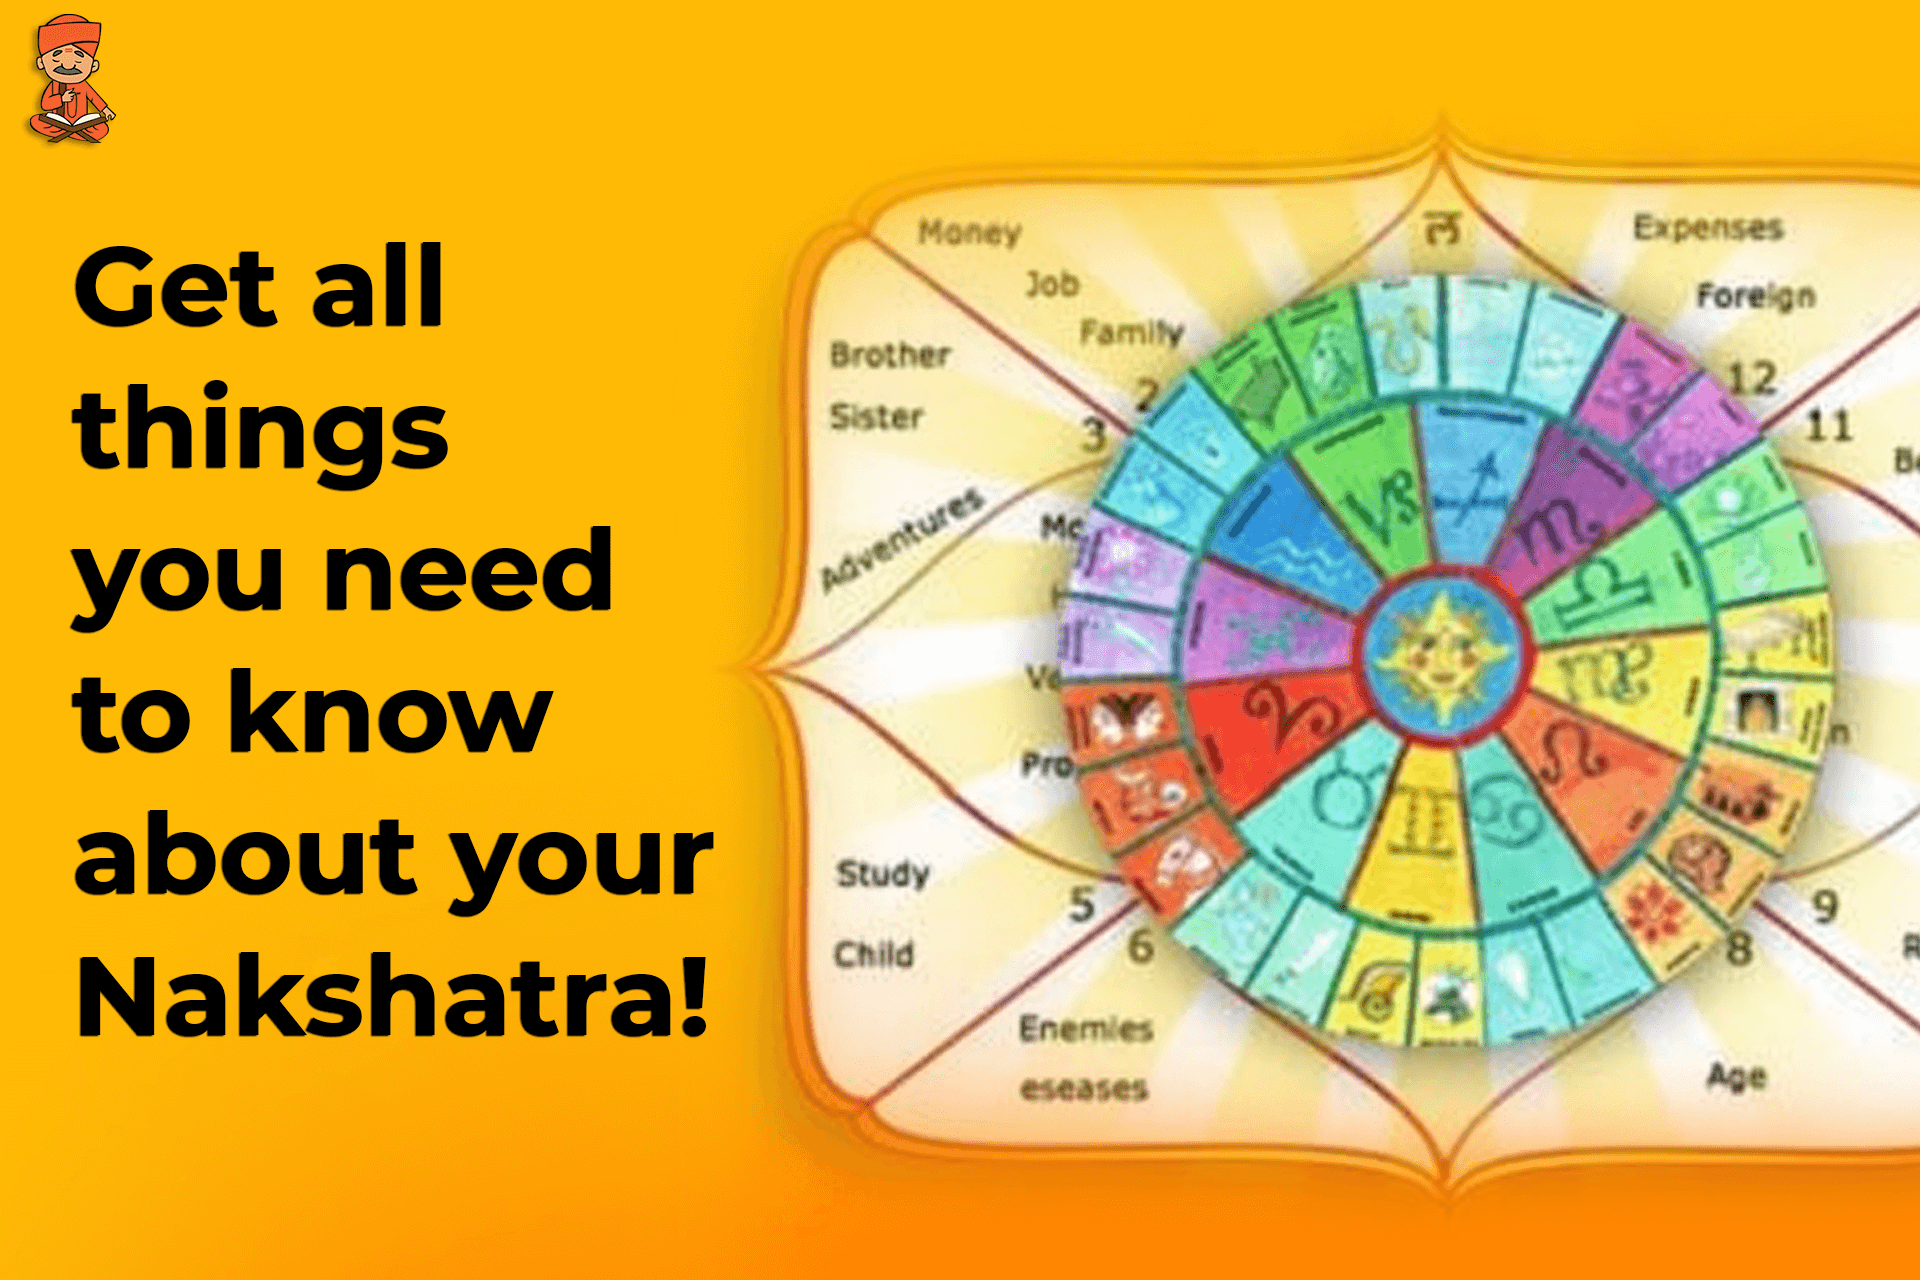 Get all Things You Need to Know About Your Nakshatra!